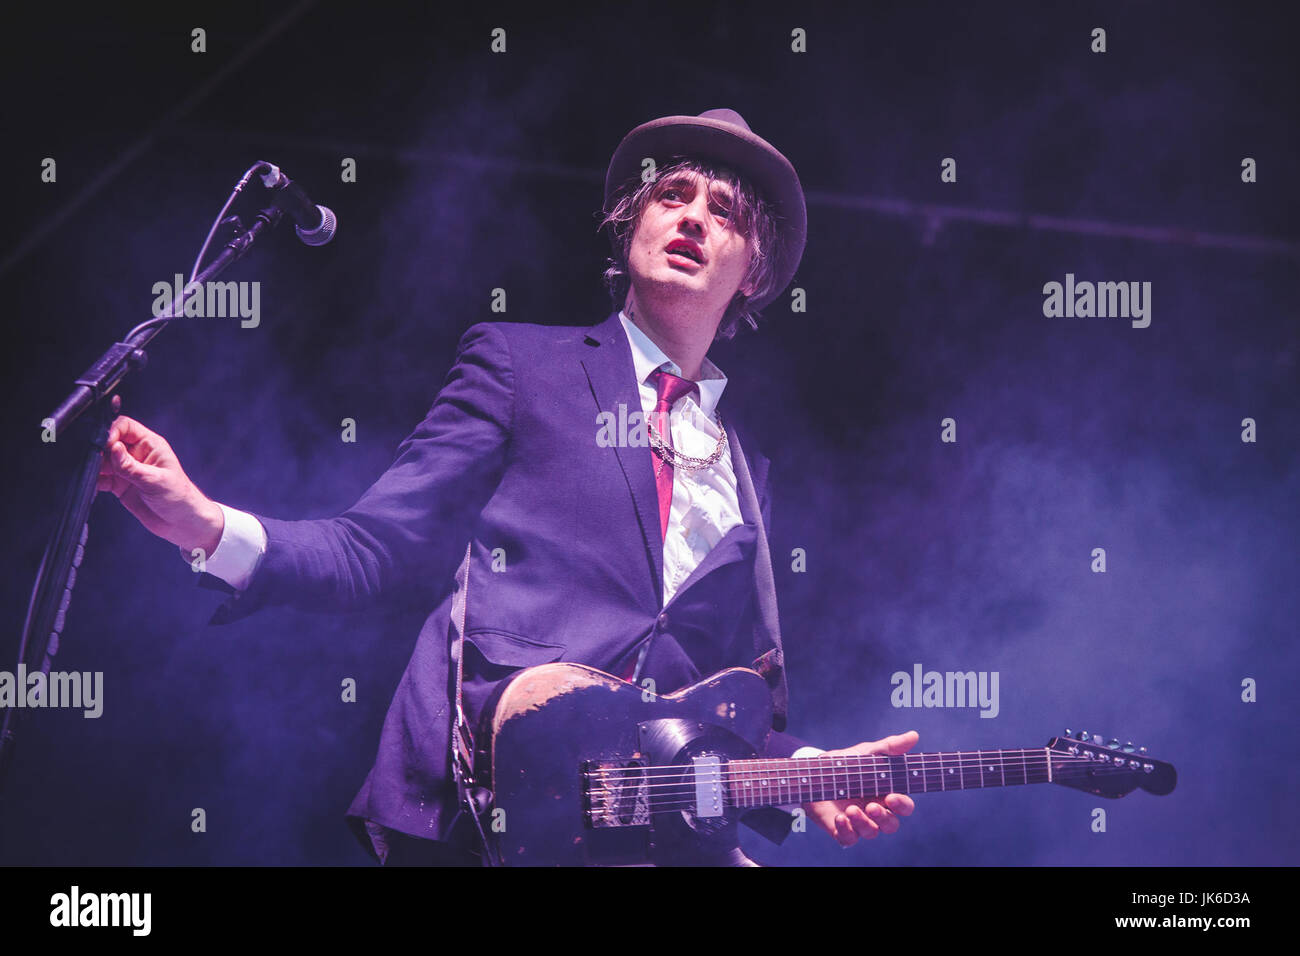 July 21, 2017 - Pete Doherty of The Libertines, performing at Tramlines Festival in Sheffield, 2017 Credit: Myles Wright/ZUMA Wire/Alamy Live News Stock Photo